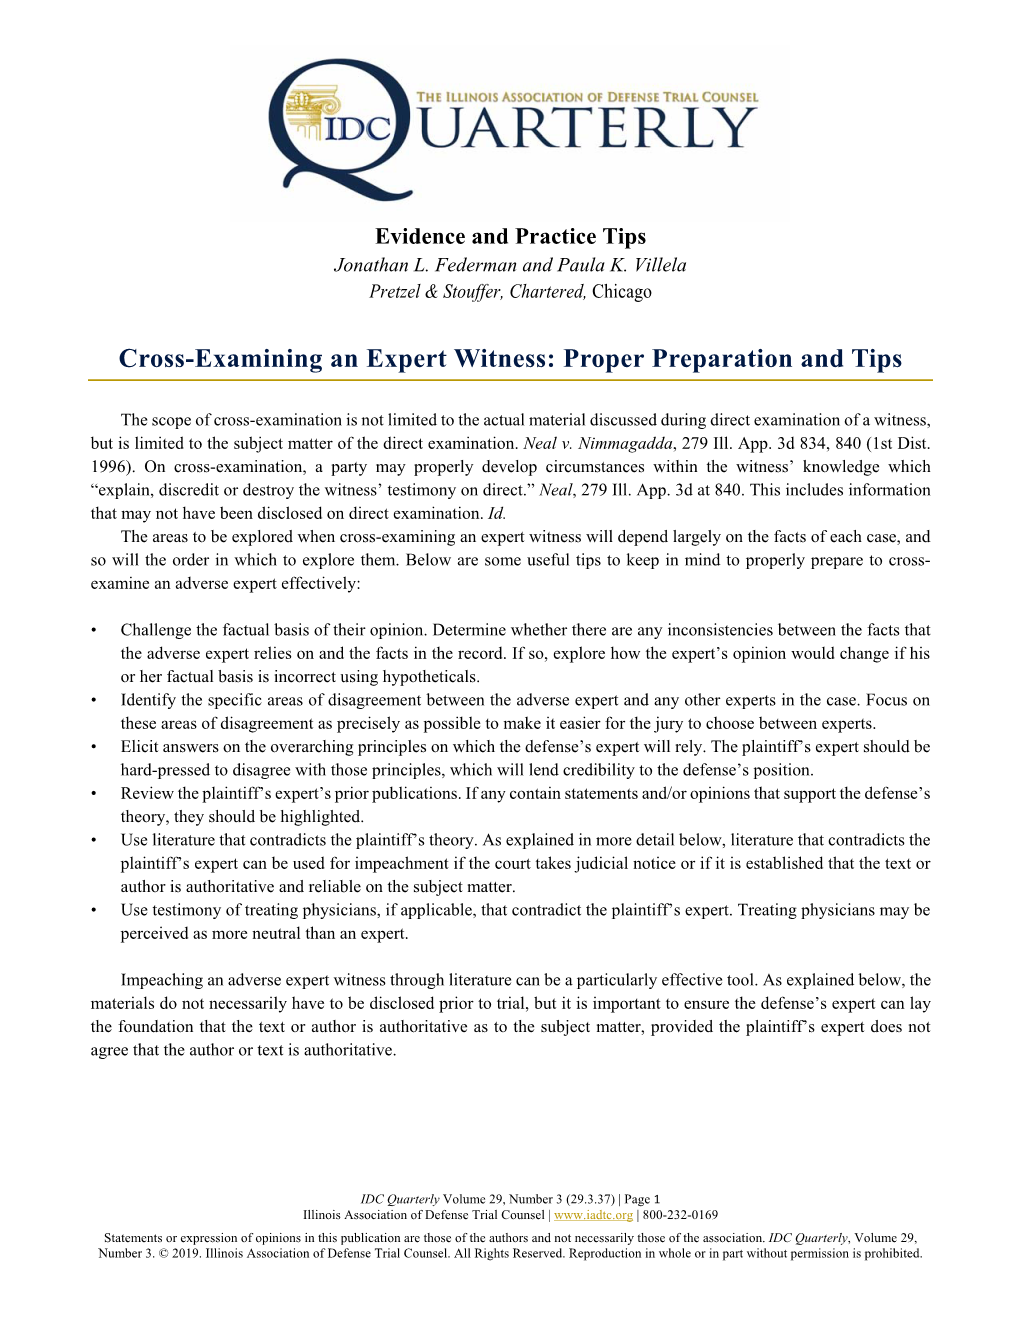 Cross-Examining an Expert Witness: Proper Preparation and Tips